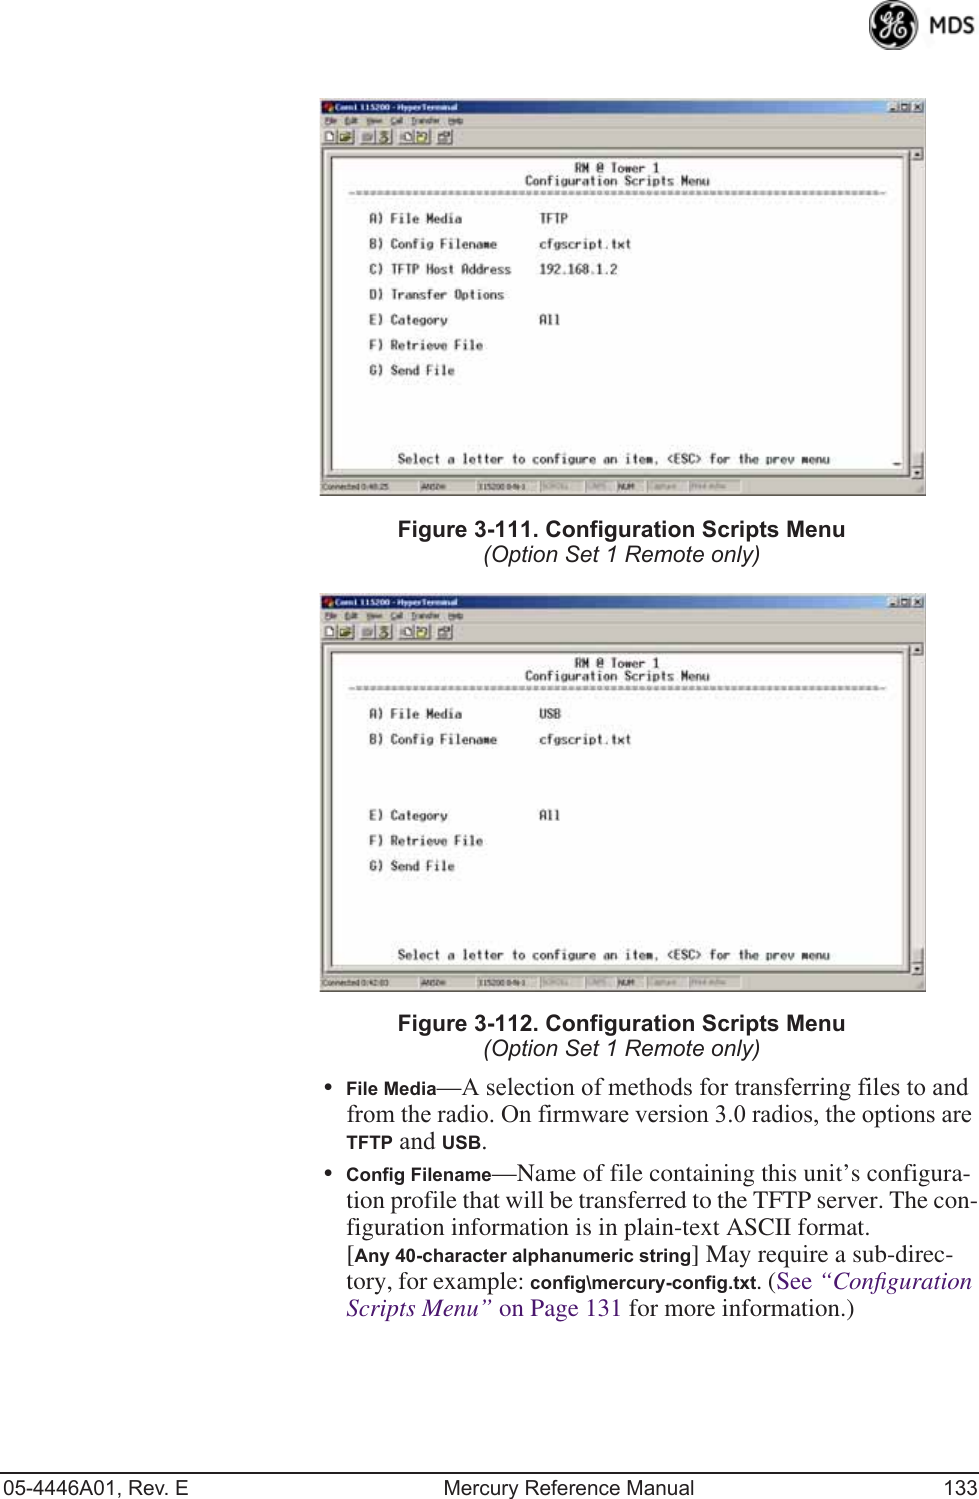 05-4446A01, Rev. E Mercury Reference Manual 133Invisible place holderFigure 3-111. Configuration Scripts Menu(Option Set 1 Remote only)Invisible place holderFigure 3-112. Configuration Scripts Menu(Option Set 1 Remote only)•File Media—A selection of methods for transferring files to and from the radio. On firmware version 3.0 radios, the options are TFTP and USB.•Config Filename—Name of file containing this unit’s configura-tion profile that will be transferred to the TFTP server. The con-figuration information is in plain-text ASCII format.[Any 40-character alphanumeric string] May require a sub-direc-tory, for example: config\mercury-config.txt. (See “Conﬁguration Scripts Menu” on Page 131 for more information.)  